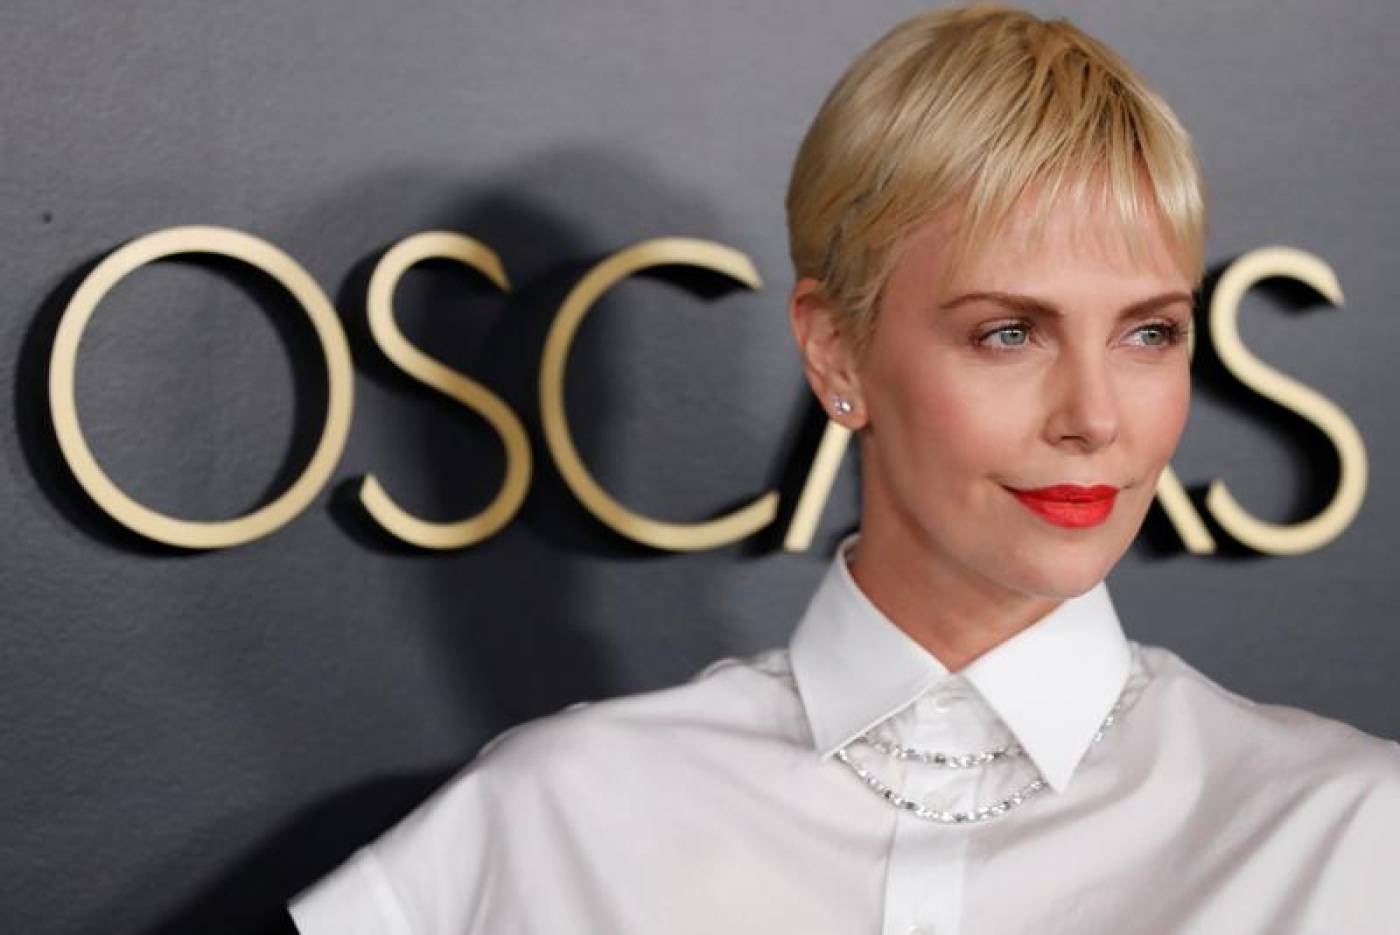 Actress Charlize Theron unveils stars joining her fight on domestic abuse